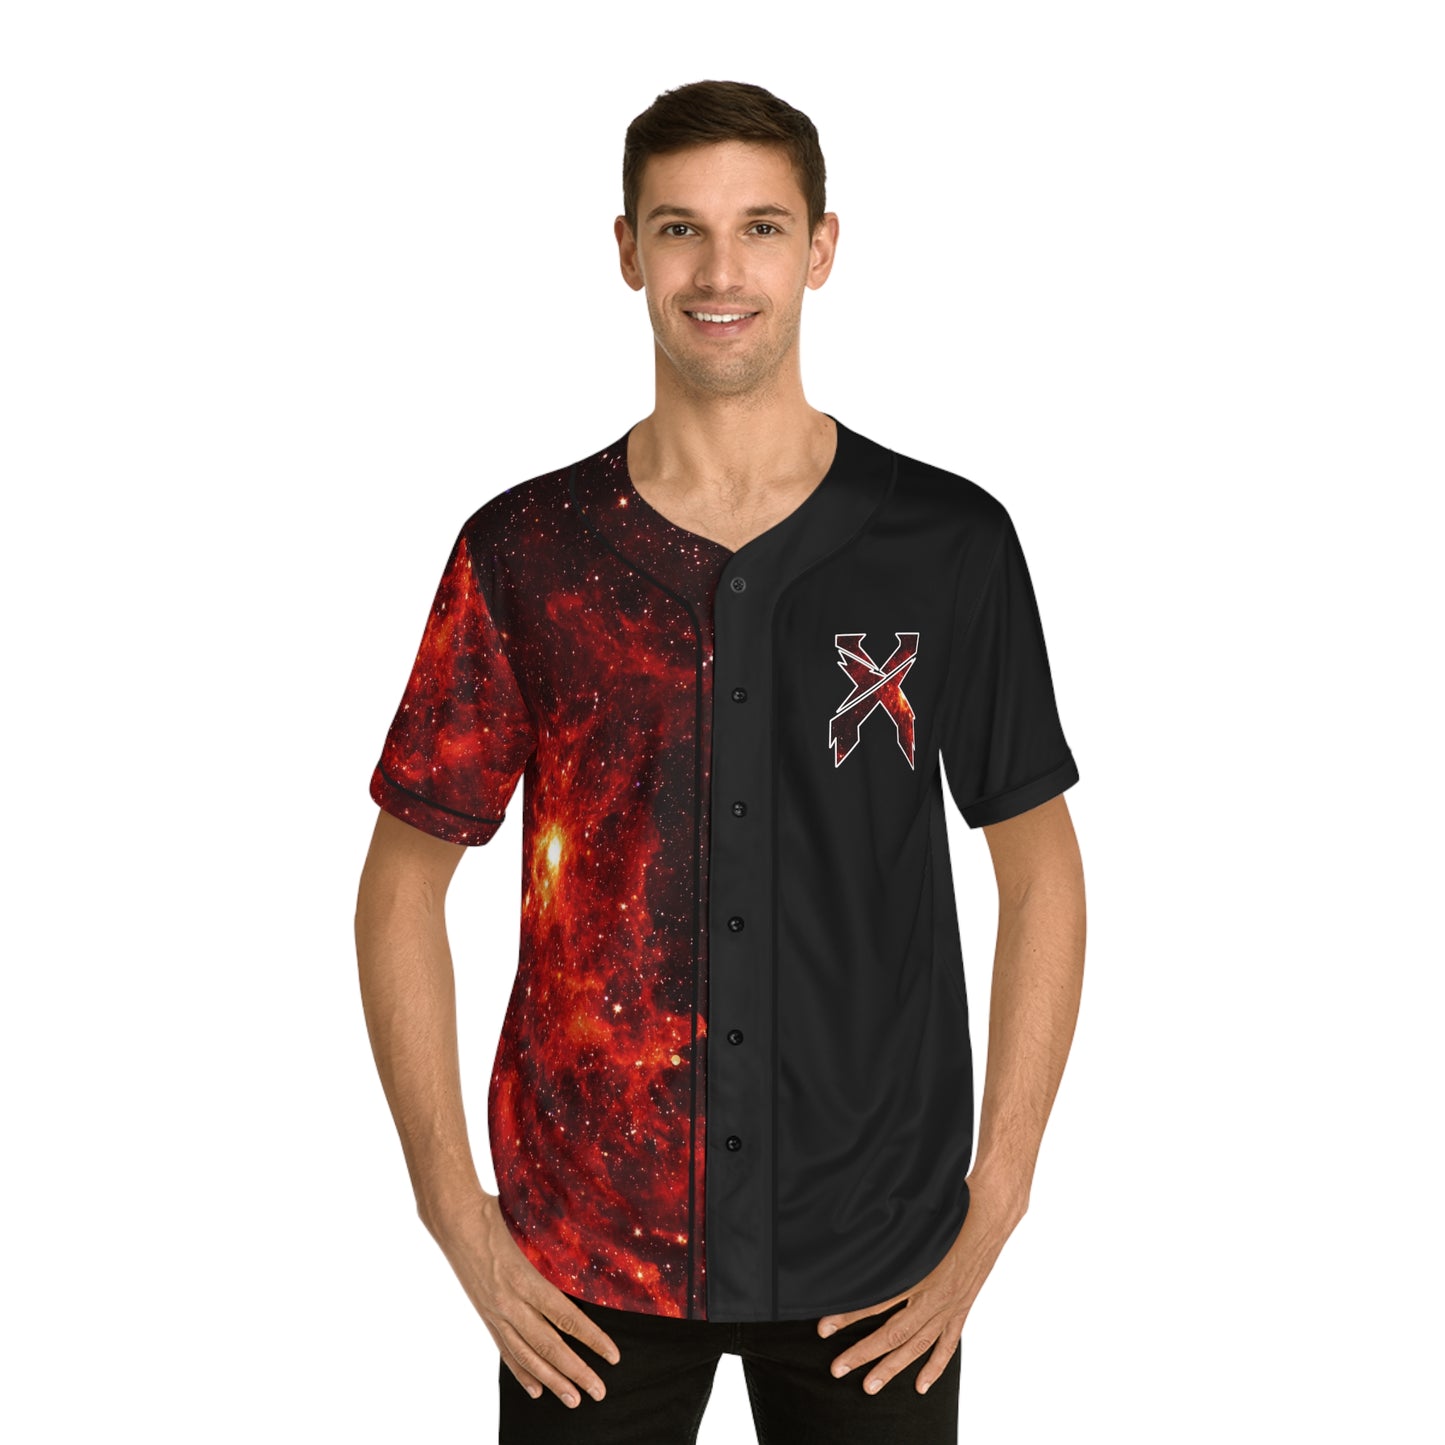 Excision Jersey (Red/Orange Galaxy)